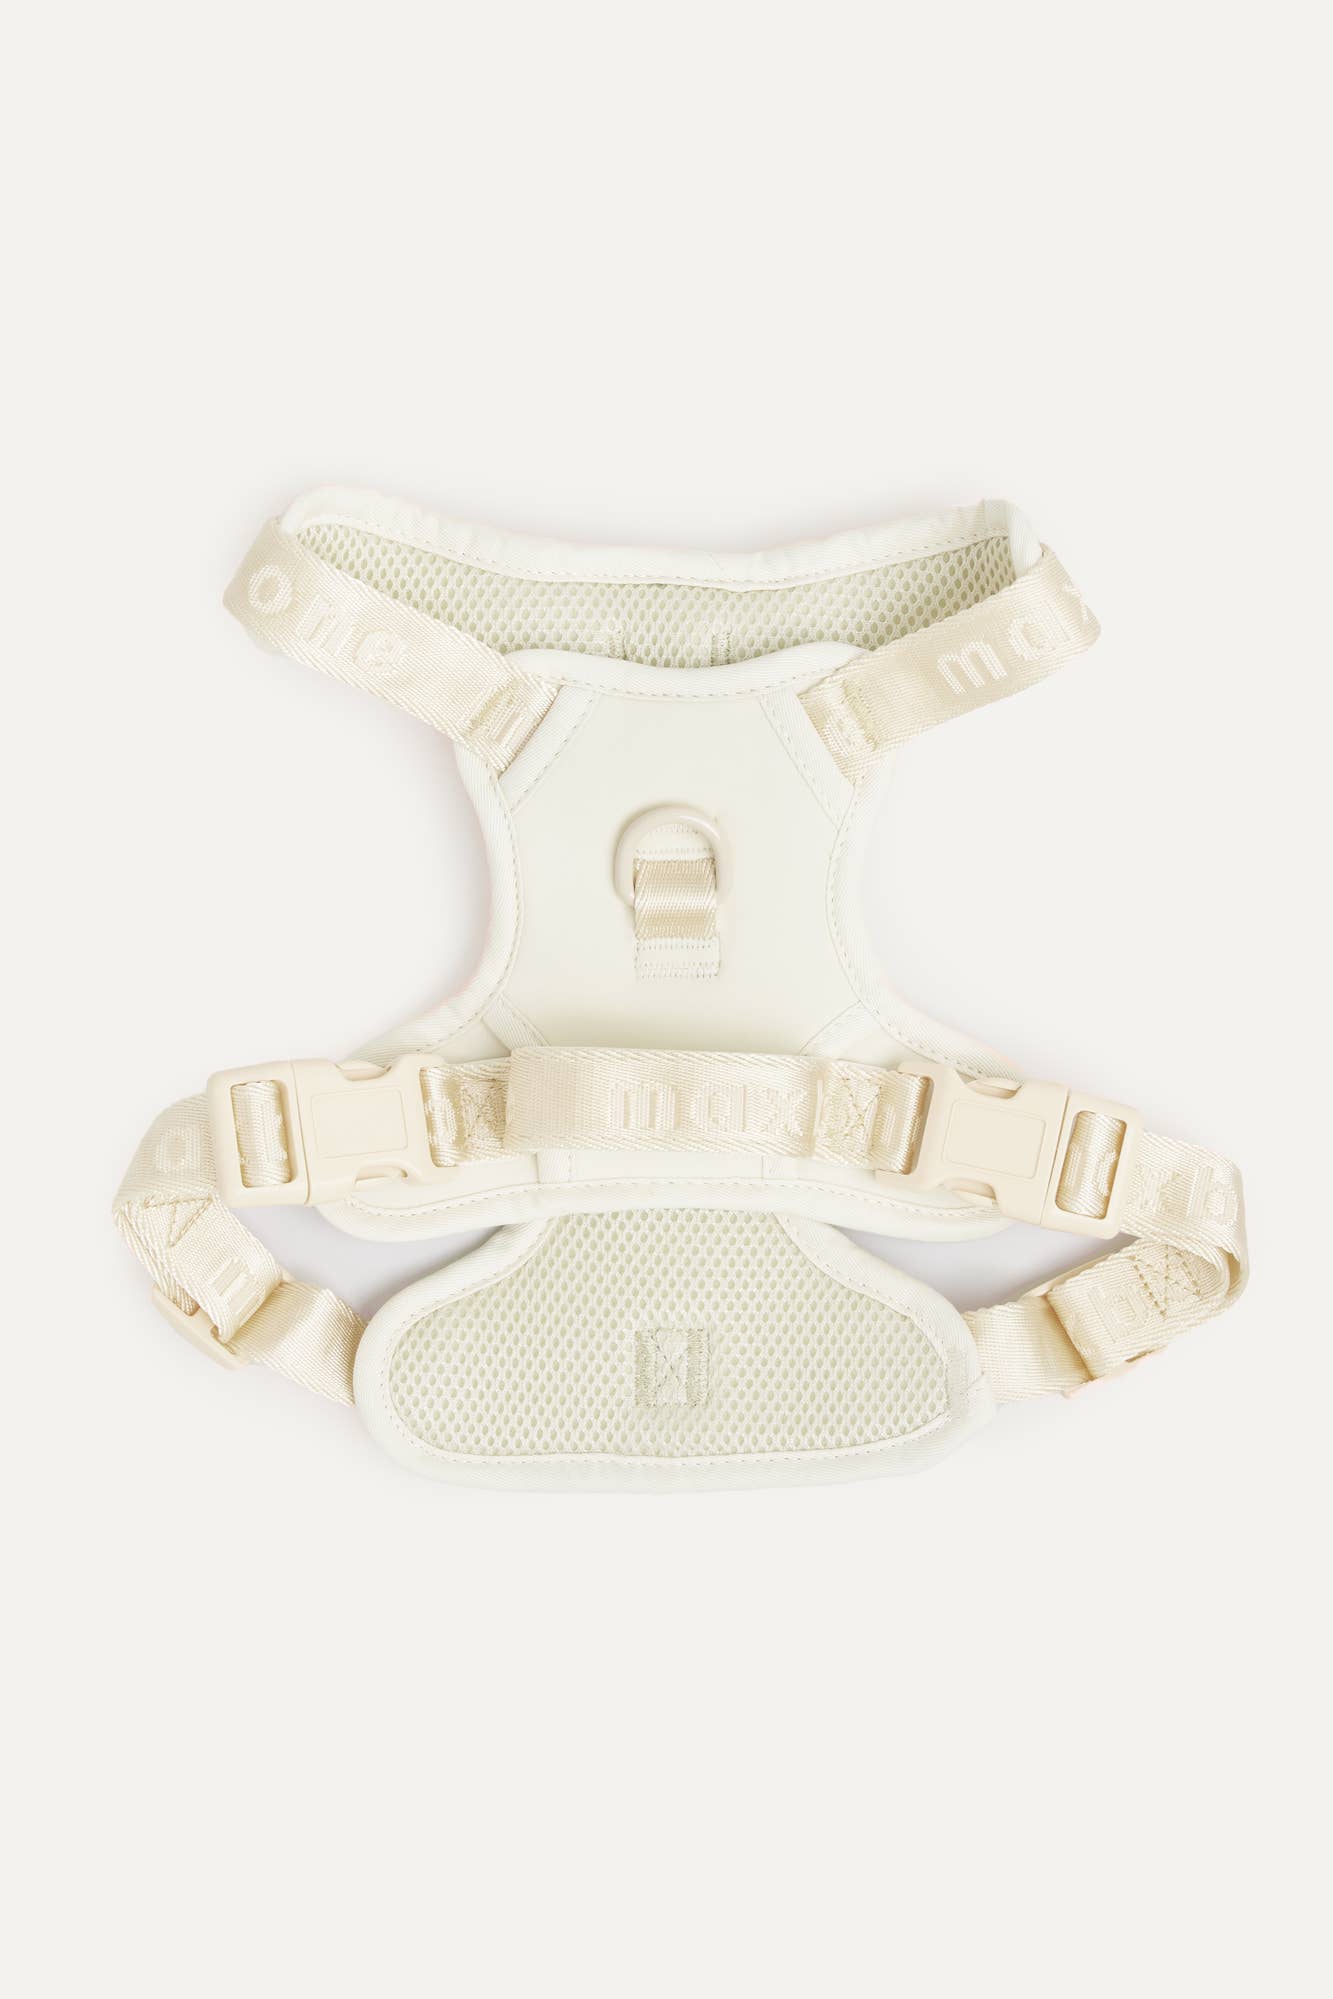 Easy Fit Dog Harness Peach